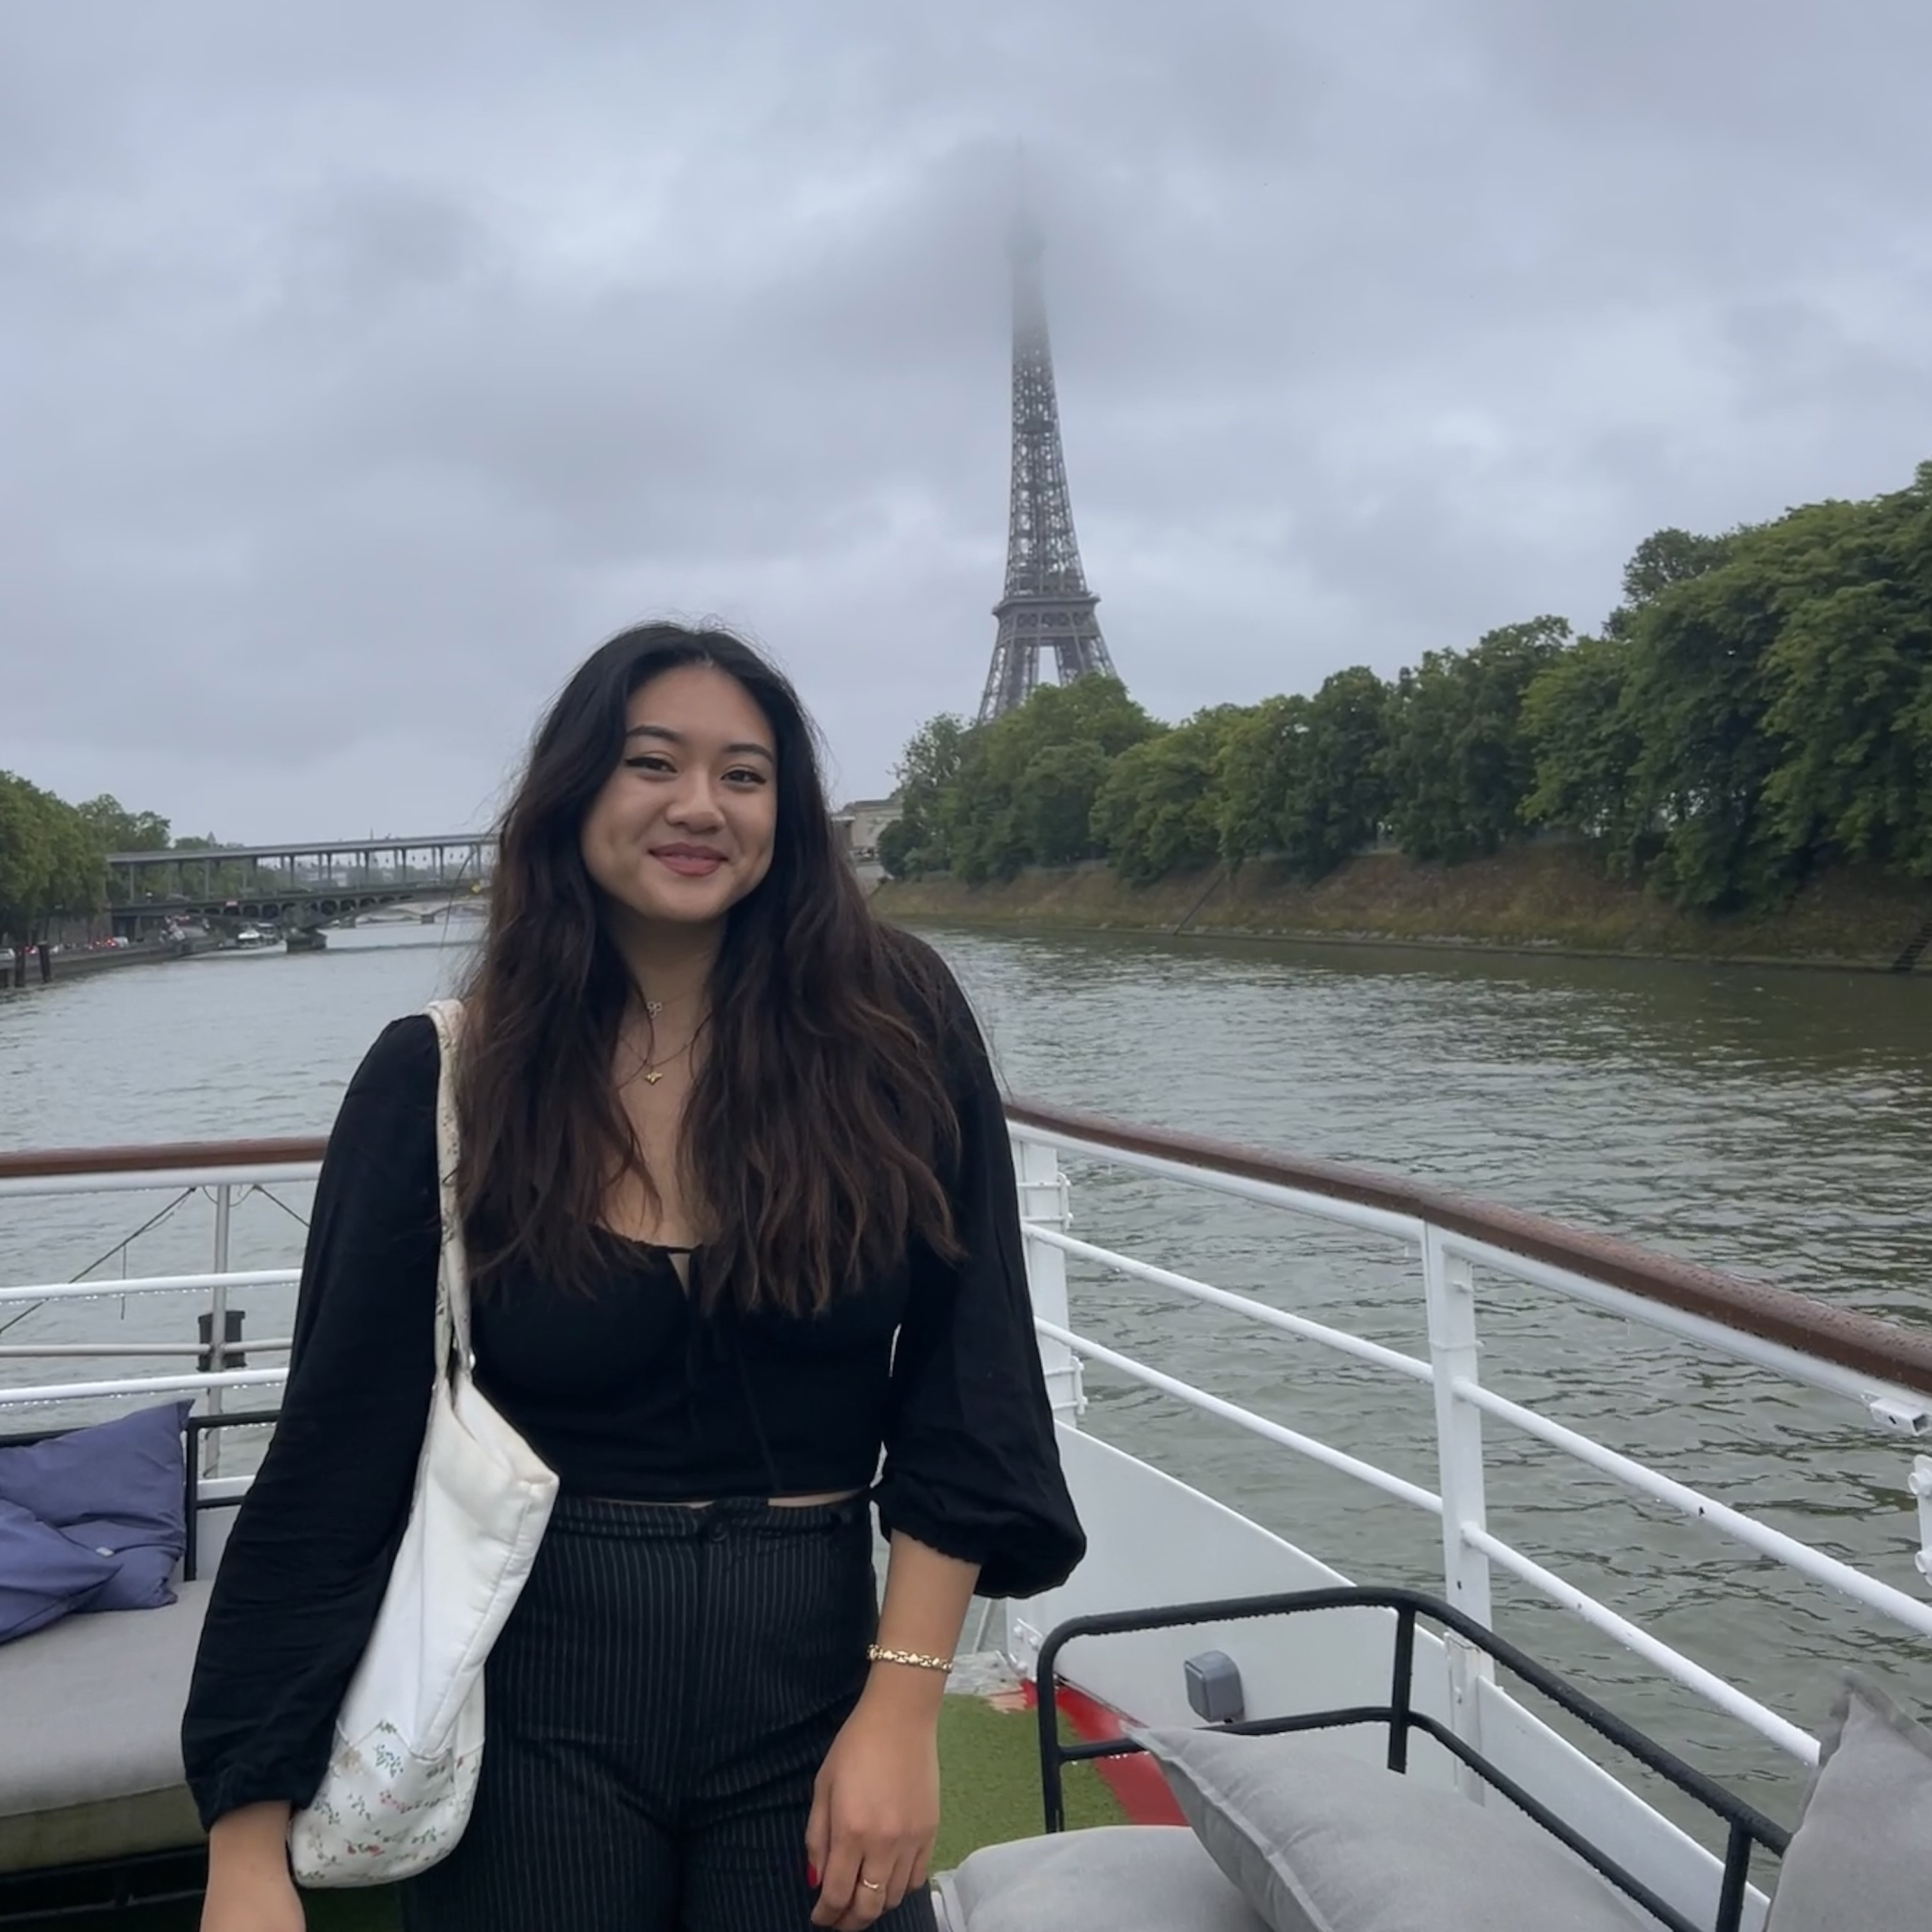 Photo of person in front of Eiffel Tower.